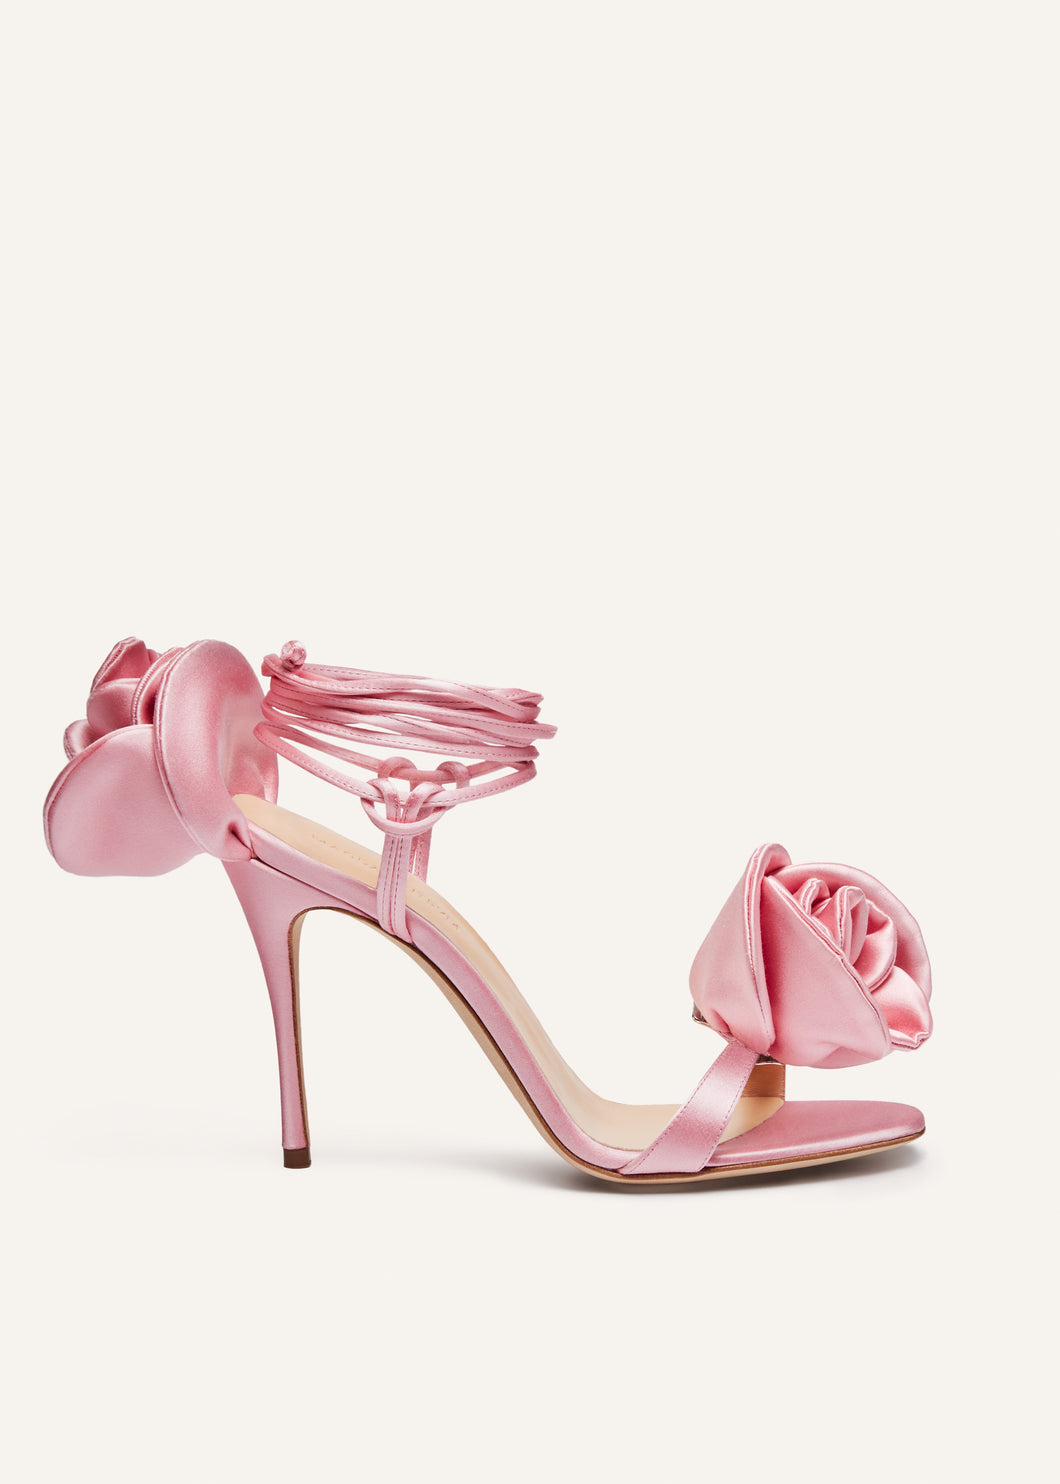 PF23 FLOWER SHOES SATIN PINK